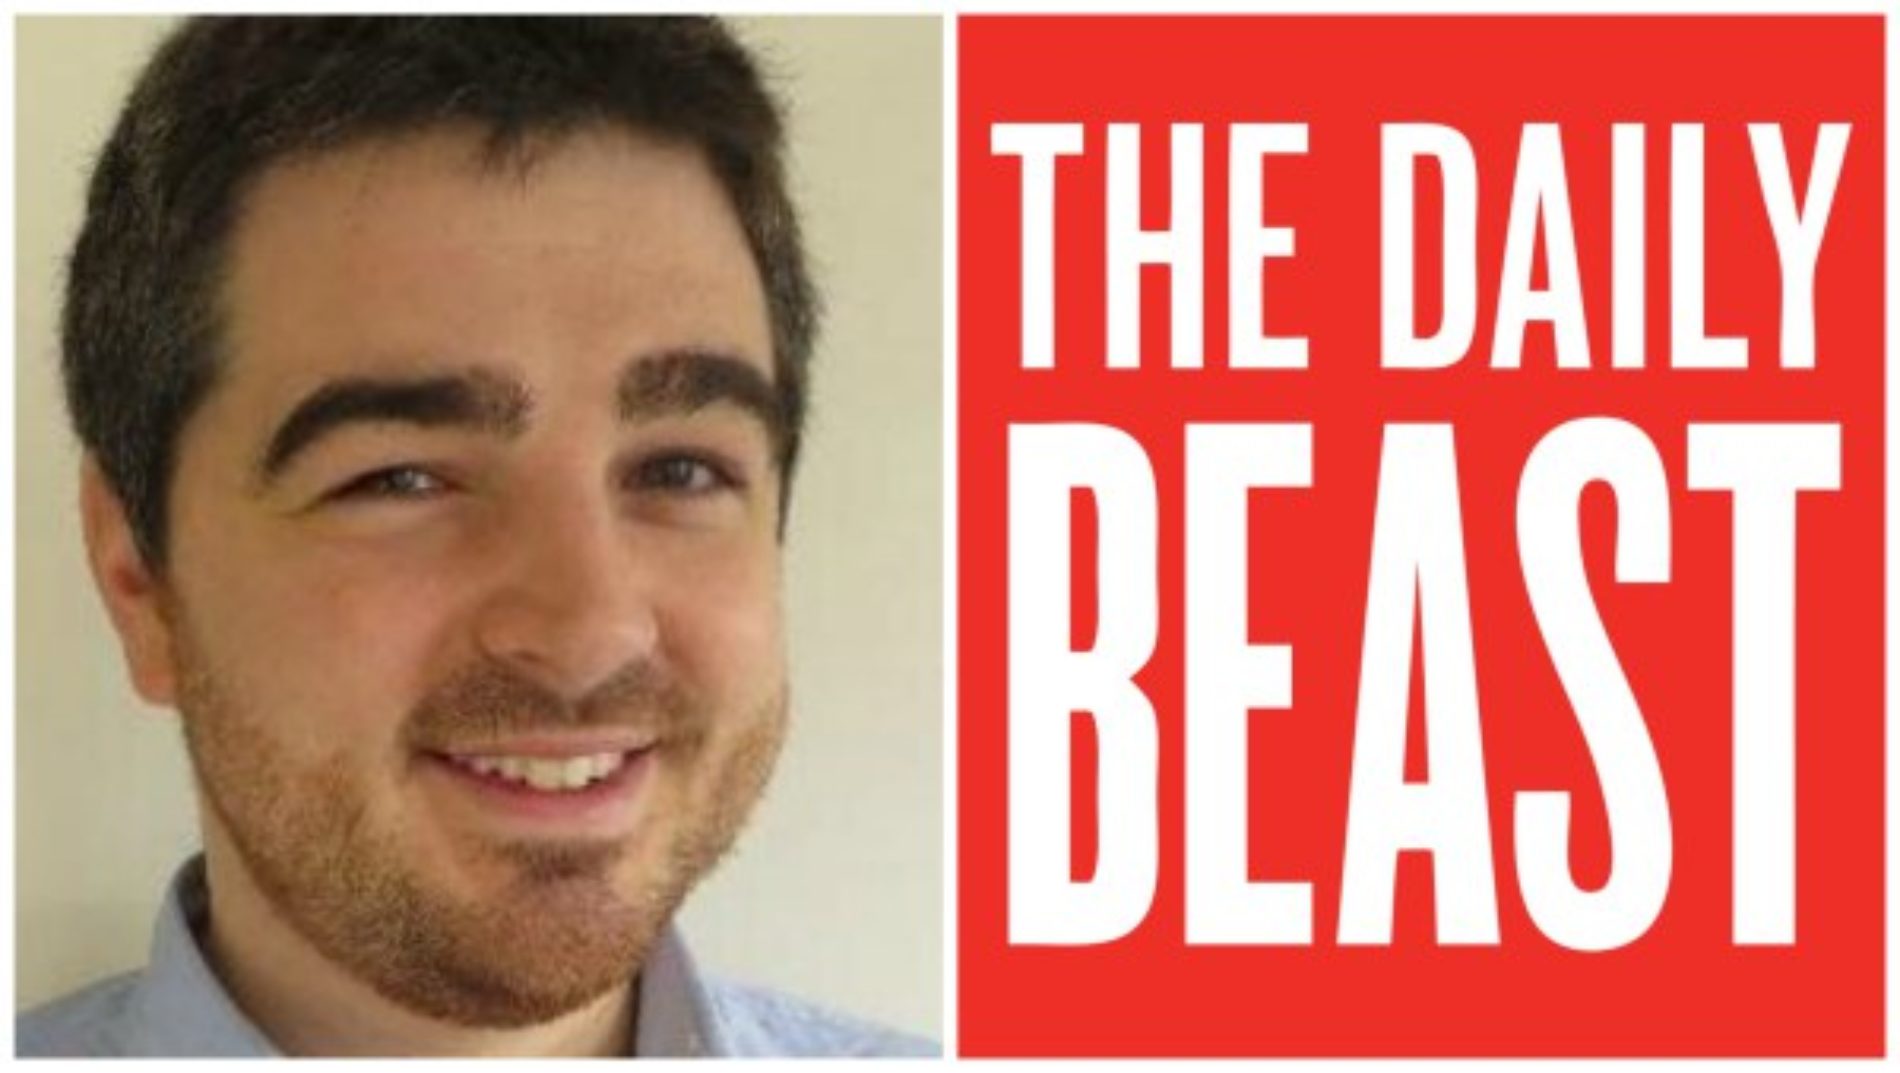 The Daily Beast finally apologizes for inflammatory article which outed gay athletes on Grindr